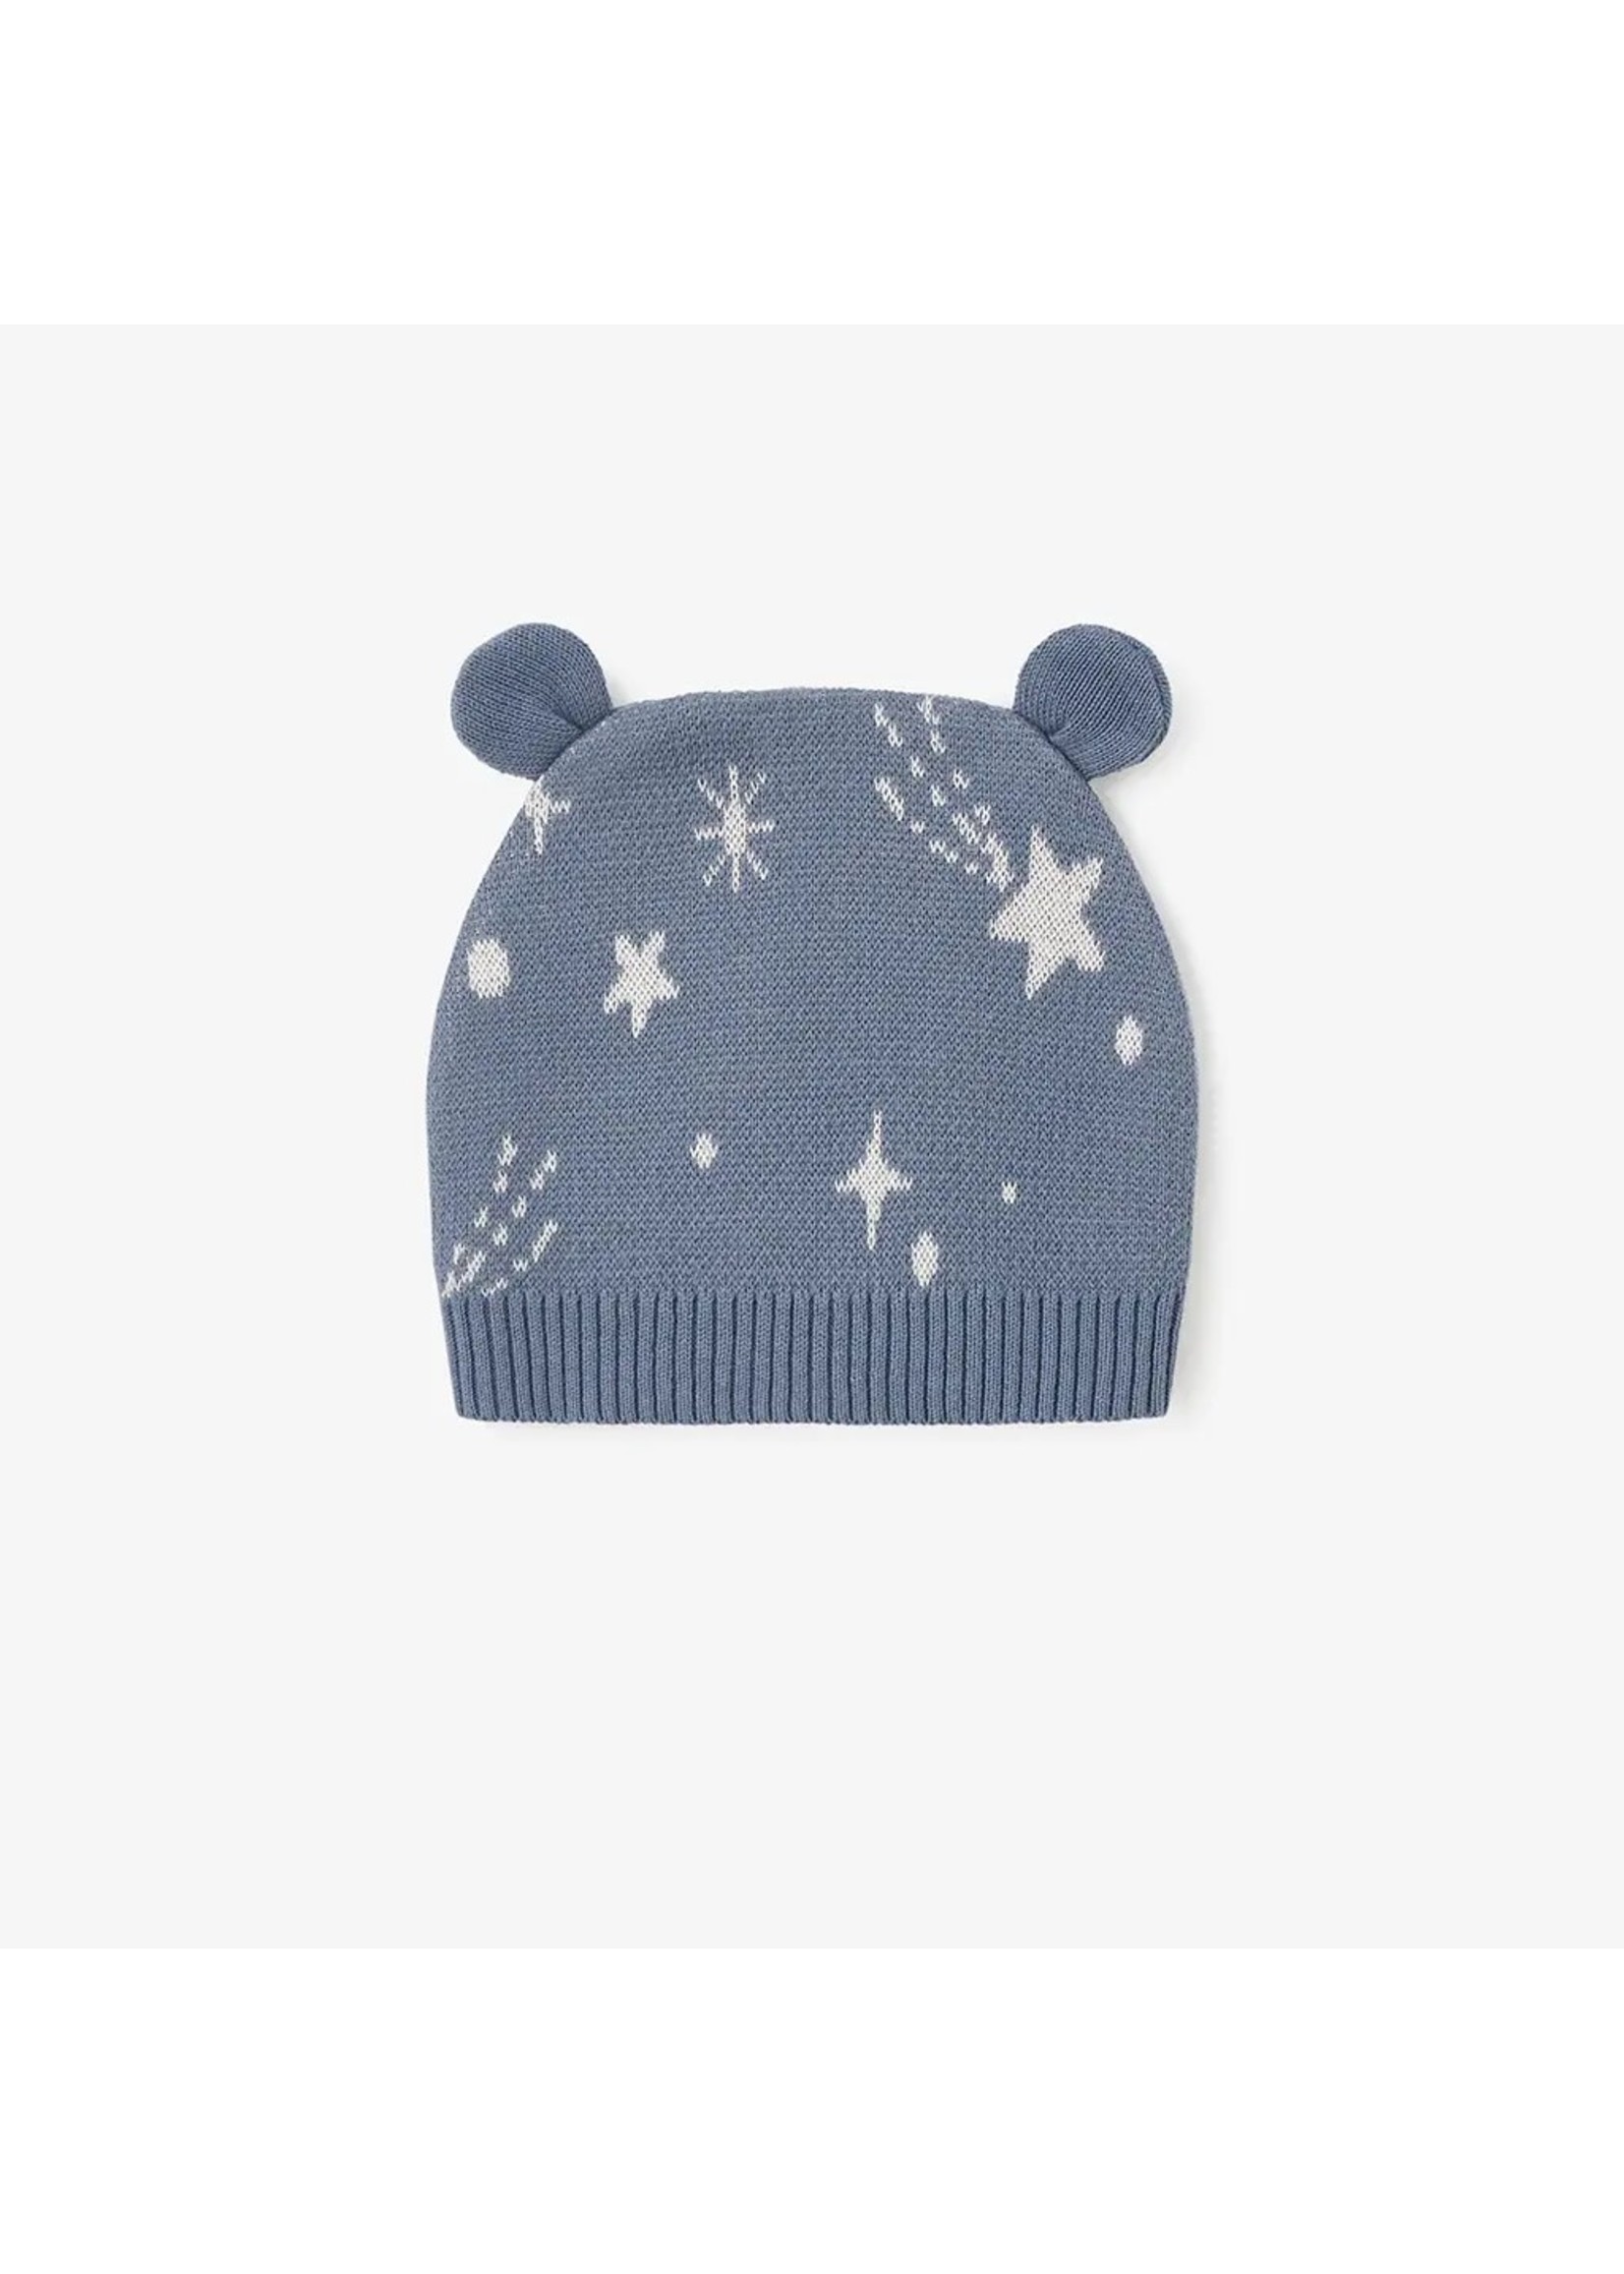 Knit Baby Hat Celestial with Bear Ears 0-12M